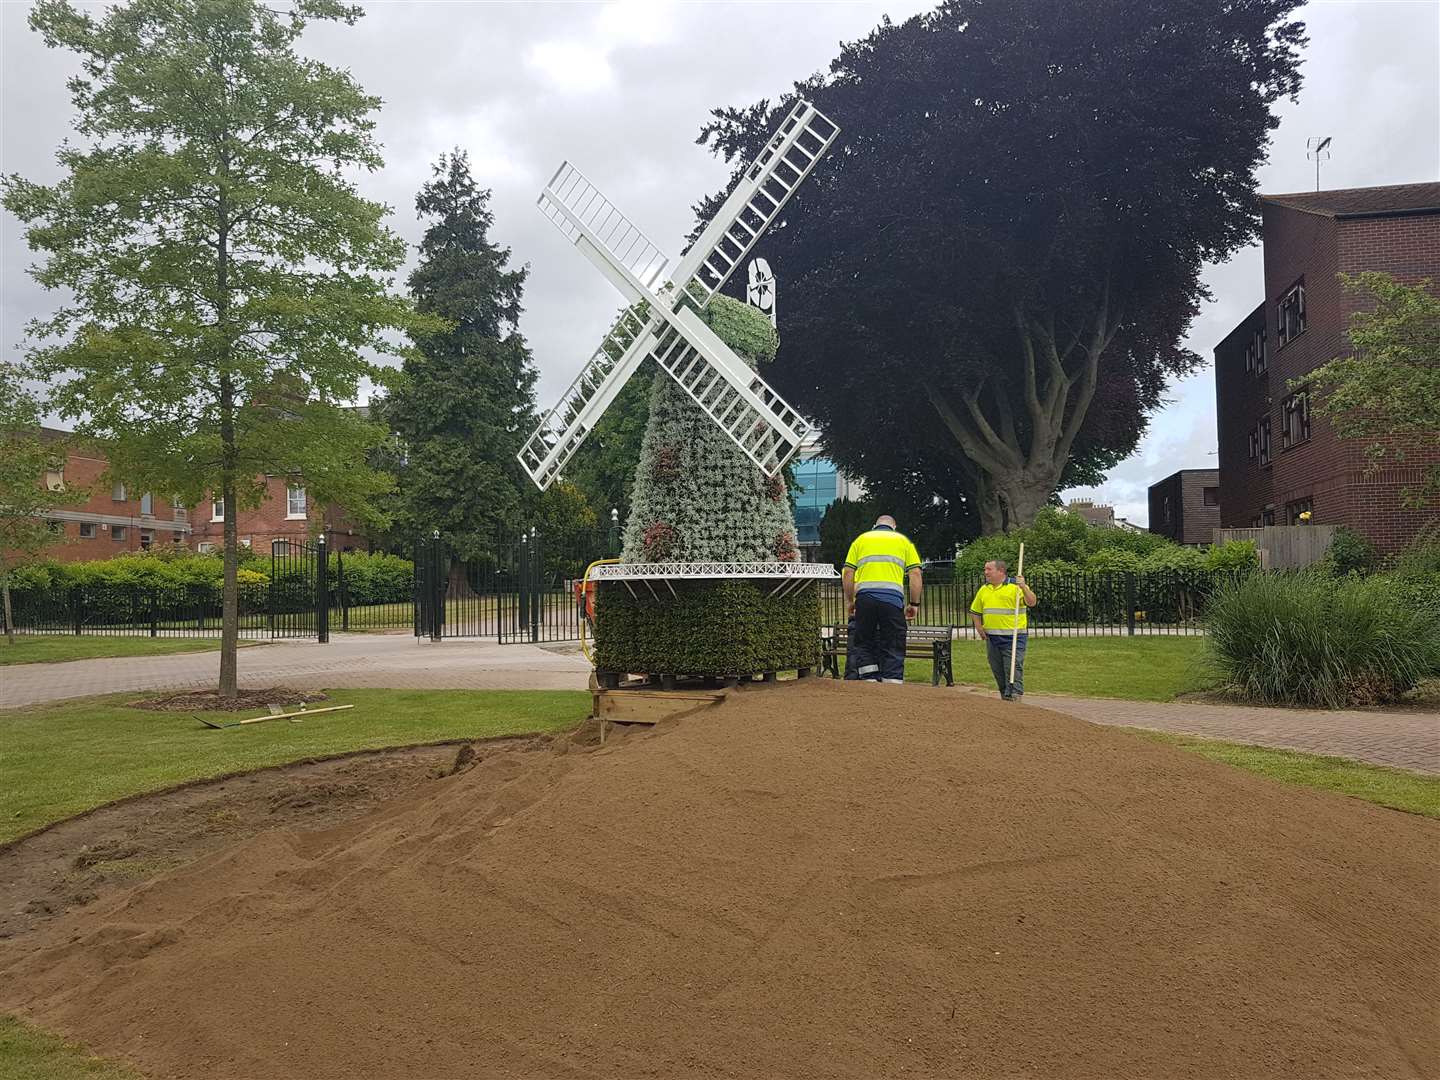 The nine-foot-tall sculpture of Willesborough Windmill comes as the historic building celebrates its 150th anniversary